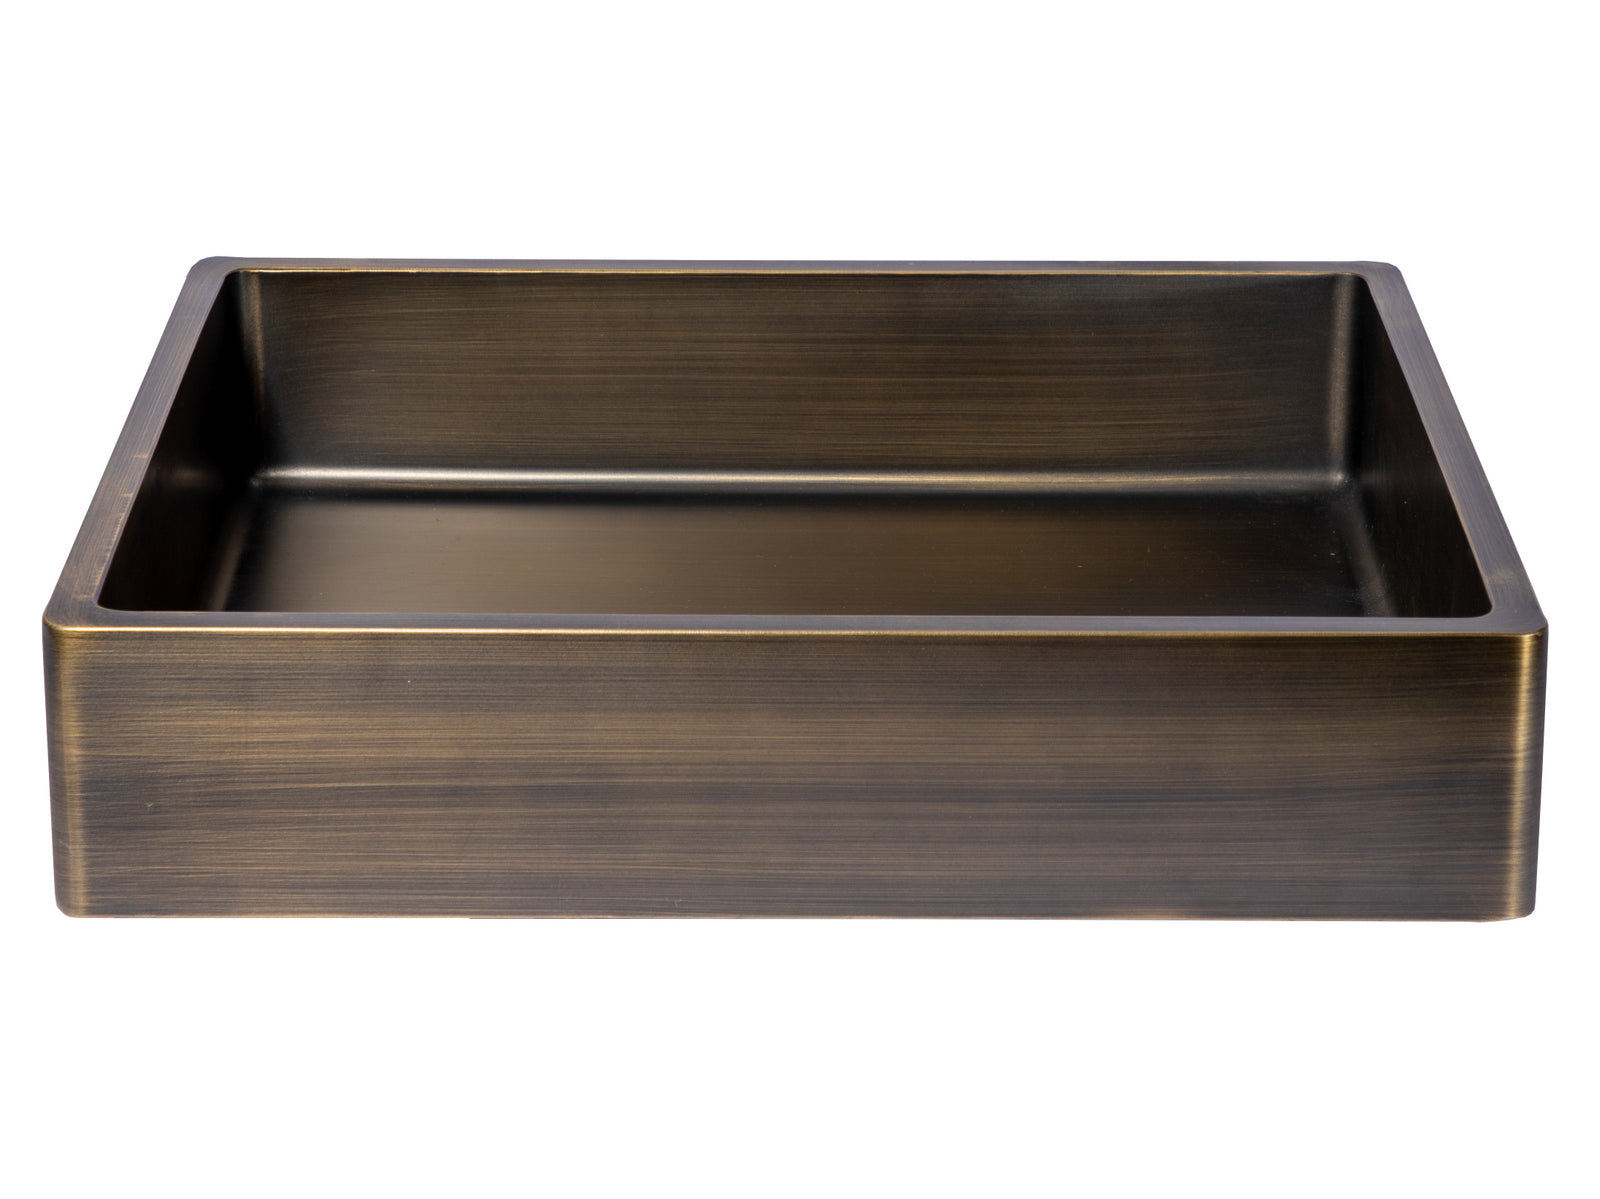 Rectangular 18 3/4" x 15 3/4" Thick Rim Stainless Steel Bathroom Vessel Sink with Drain in Antique Gold